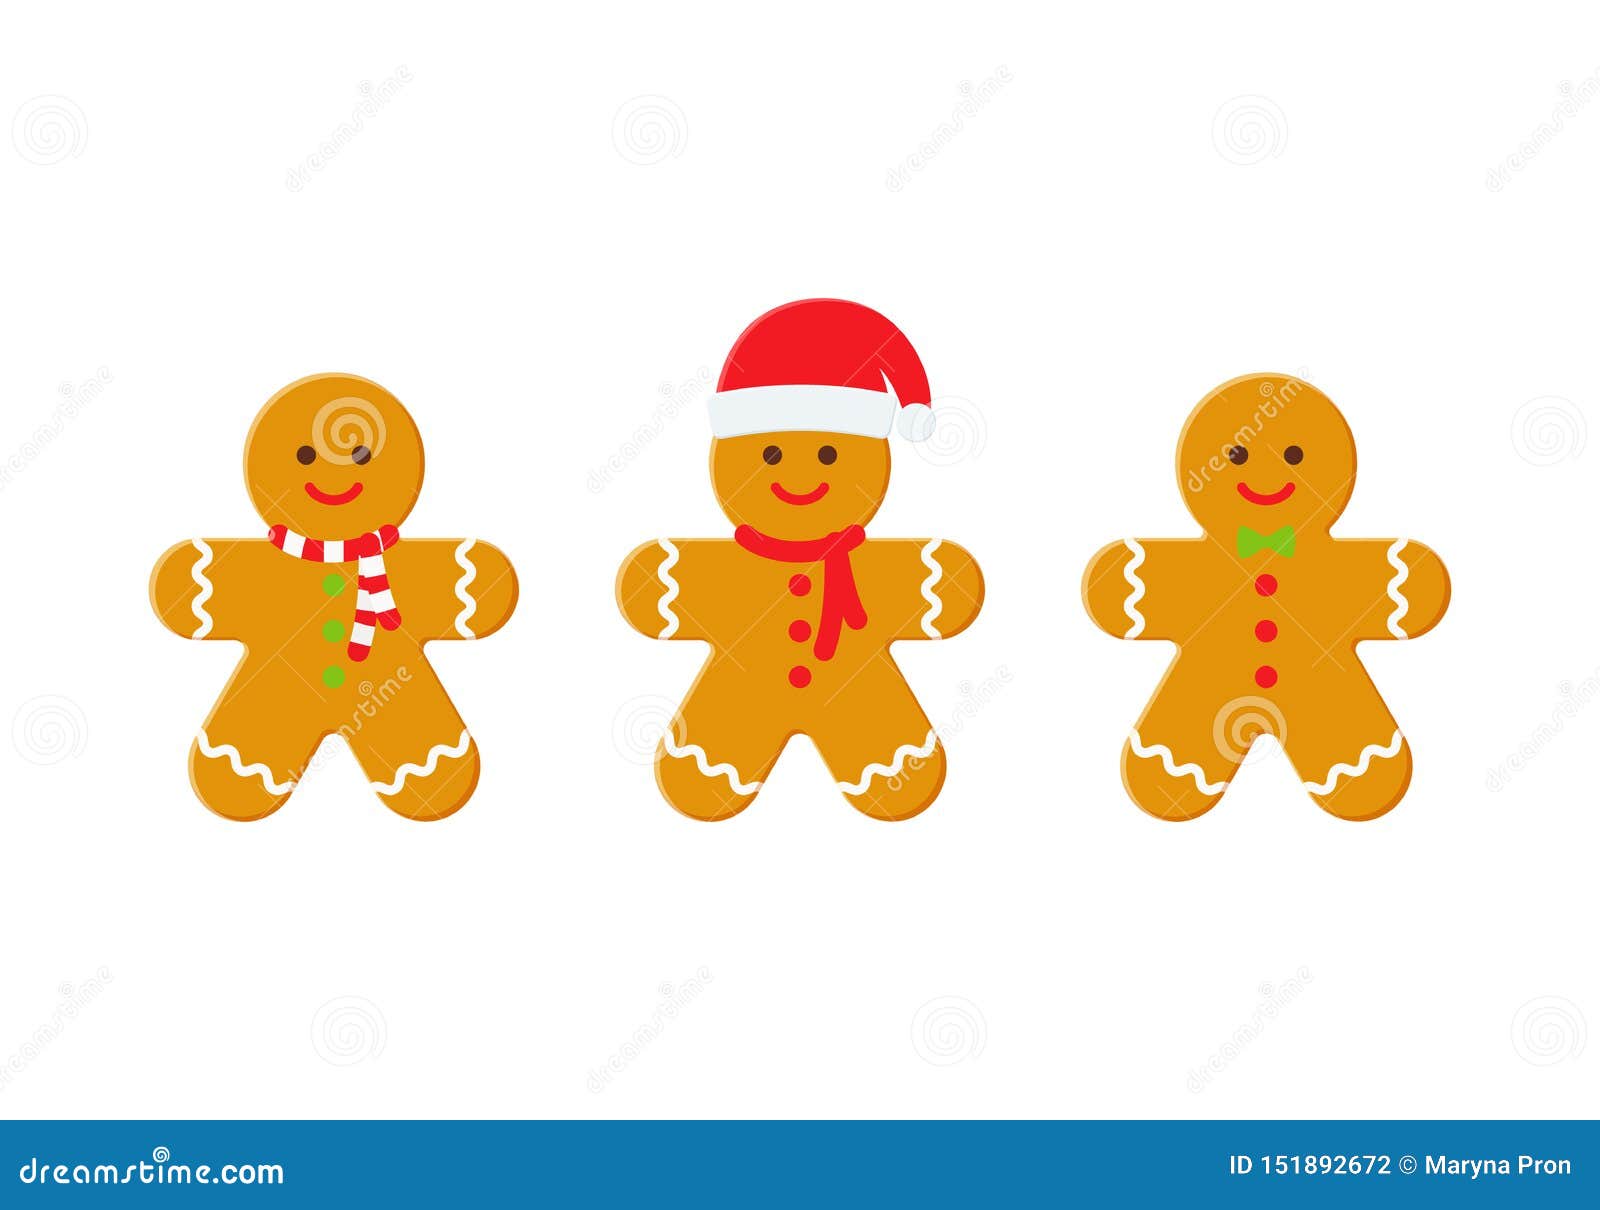 Gingerbread Man. Christmas Icon. Vector Illustration in Flat Design ...